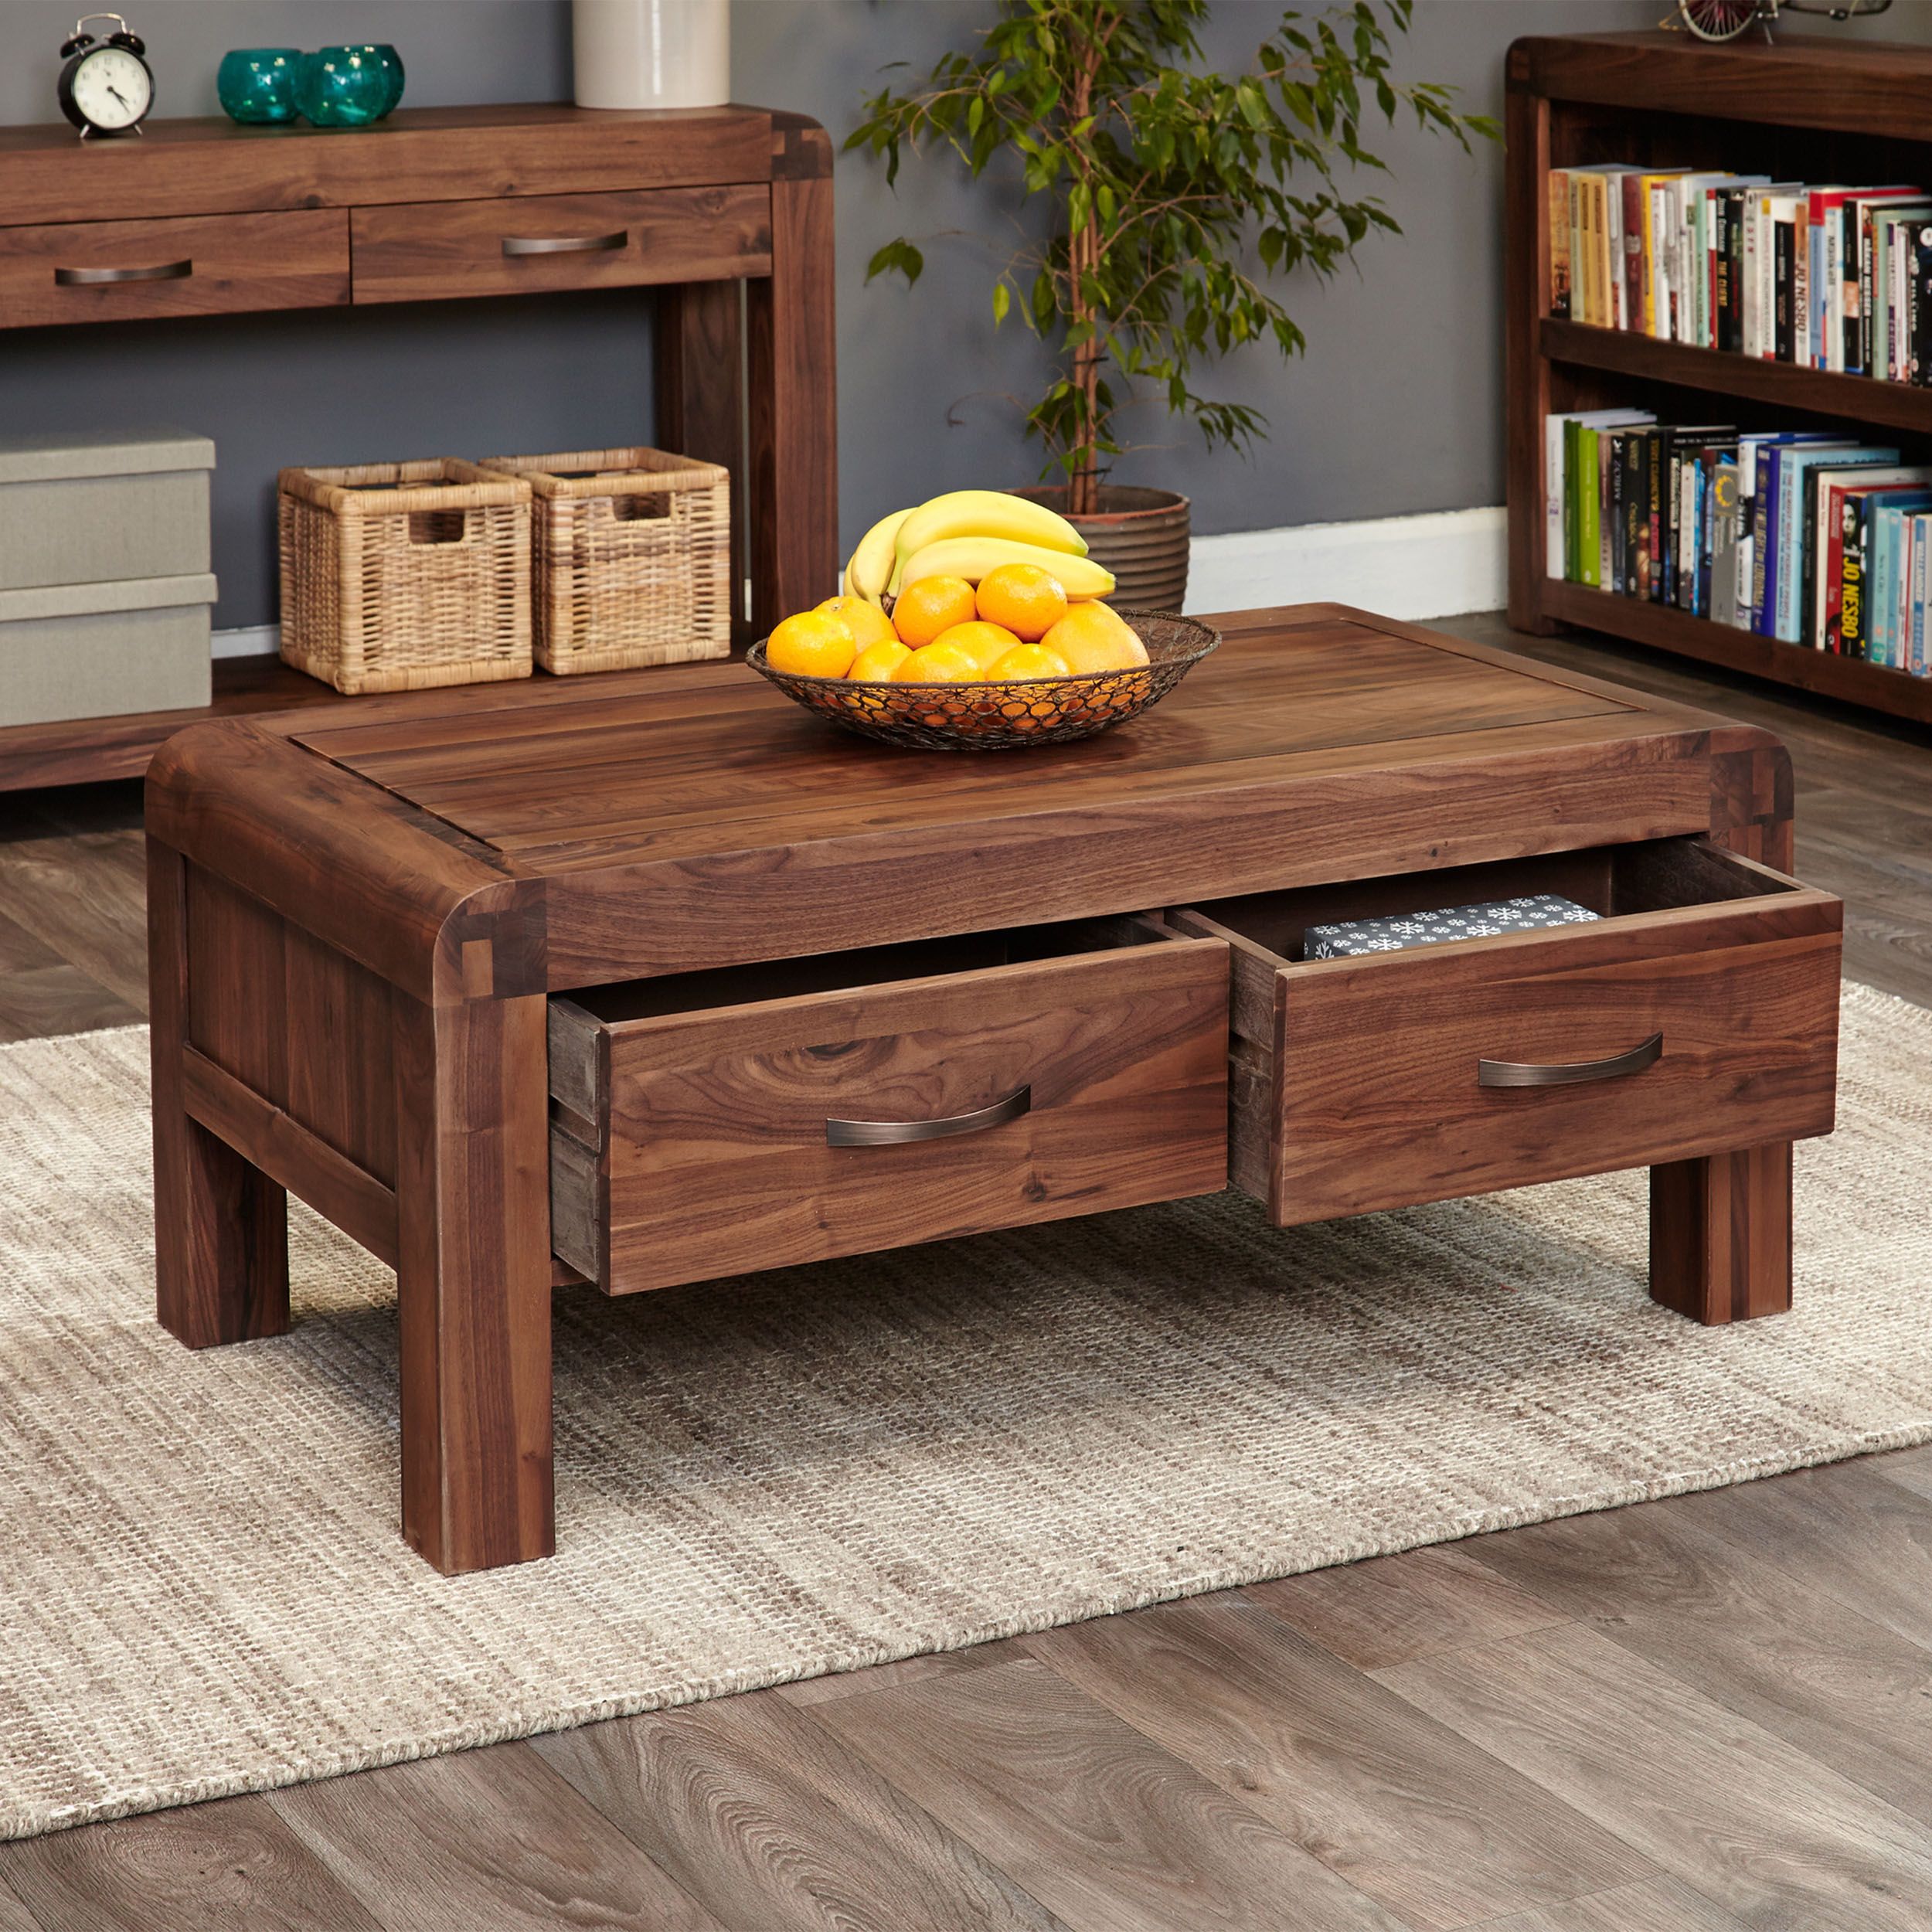 Solid Walnut Coffee Table With Storage – Shiro Throughout Wood Coffee Tables With 2 Tier Storage (Gallery 9 of 20)